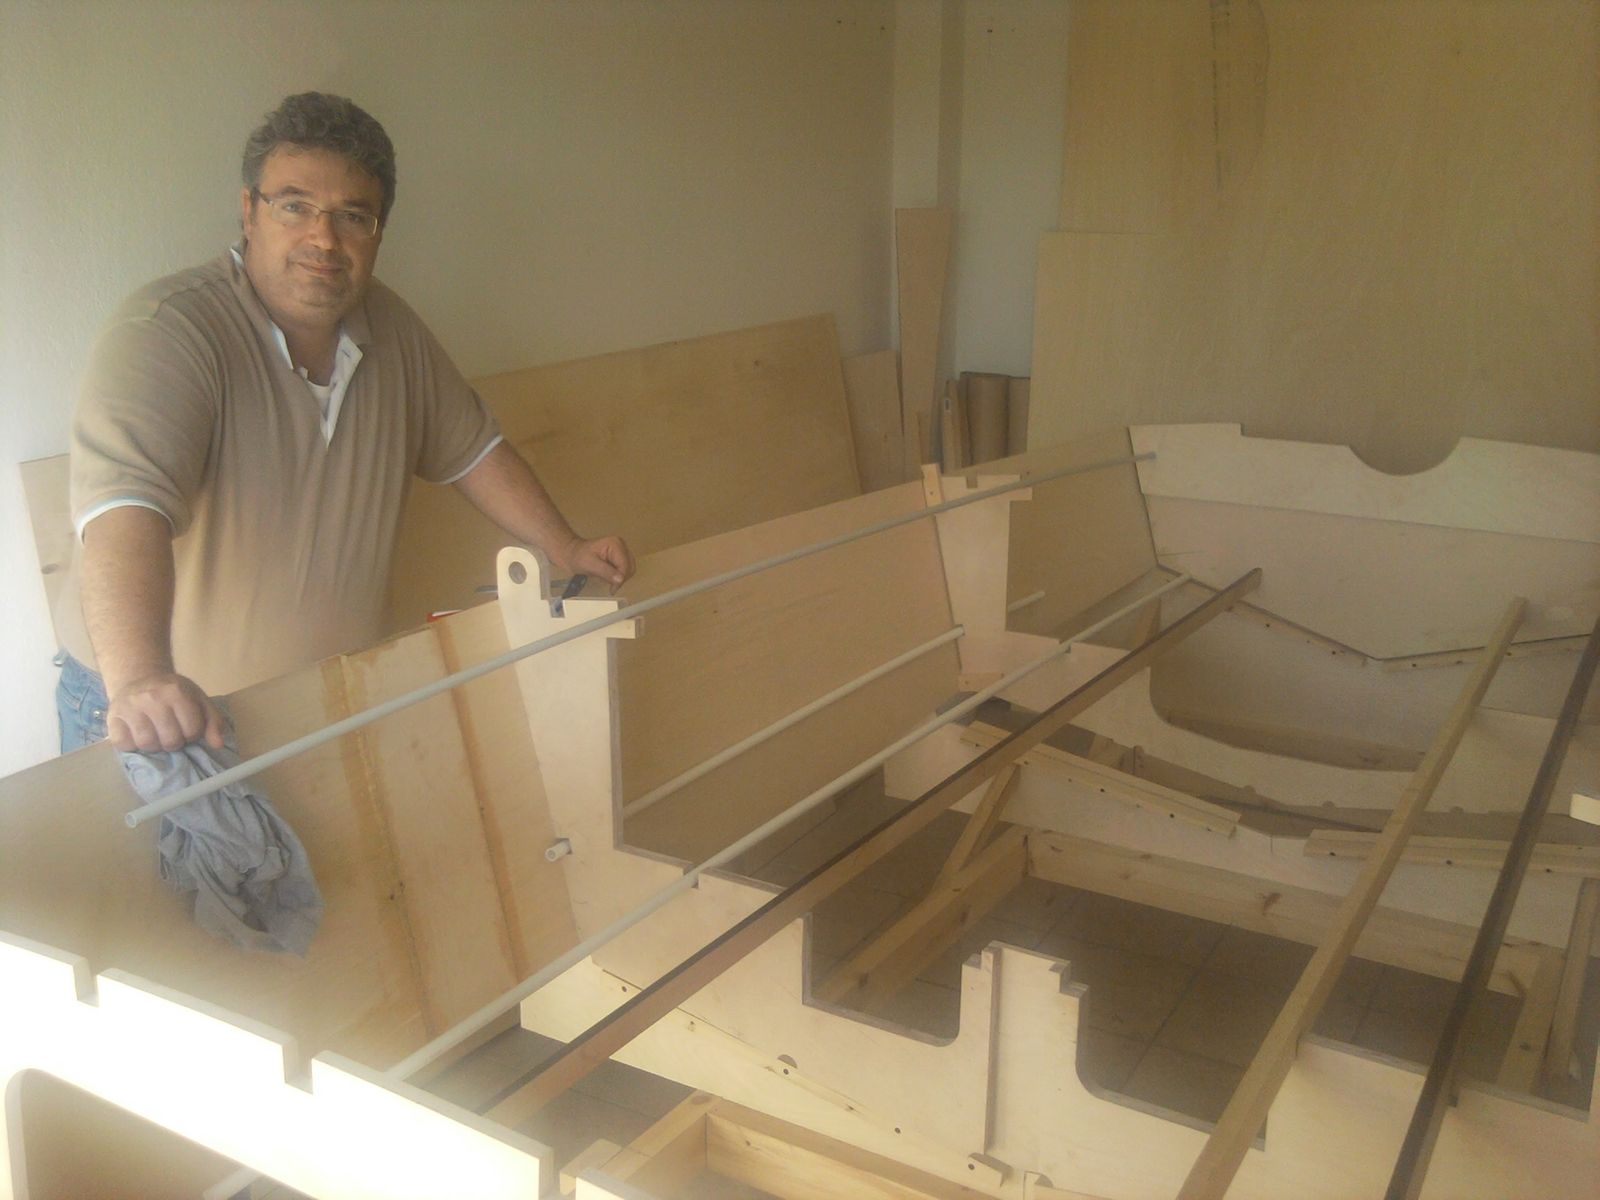 Building a boat is a happy thing!!!
As you can see I have modified the Frames a little buy adding Gunwale supports 
